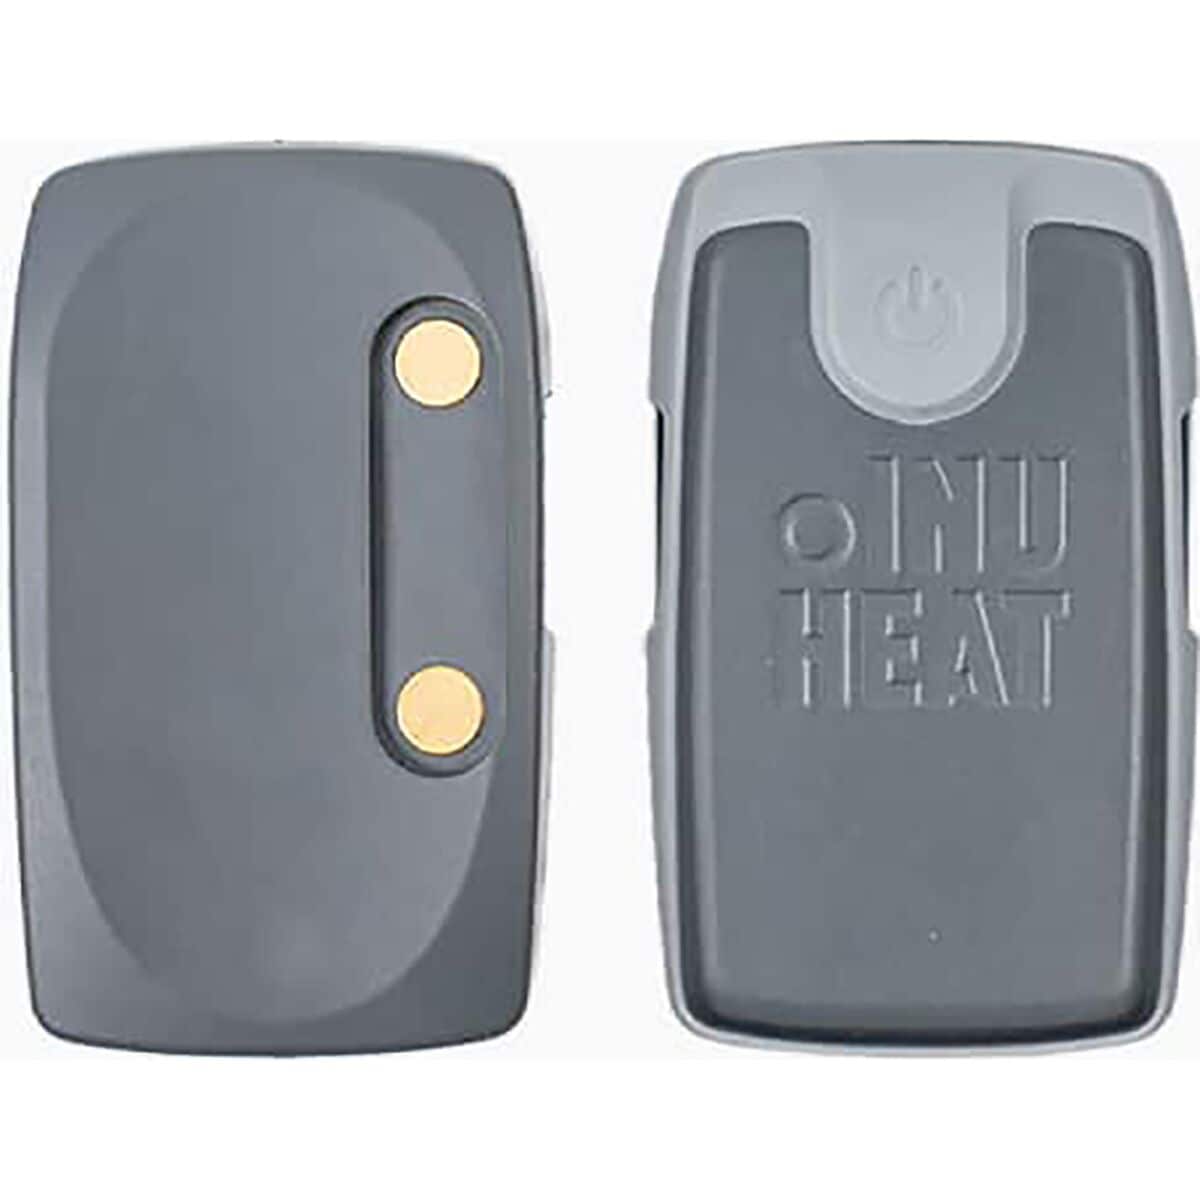 Giro INUHEAT Power Pack One Color, One Size - Men's